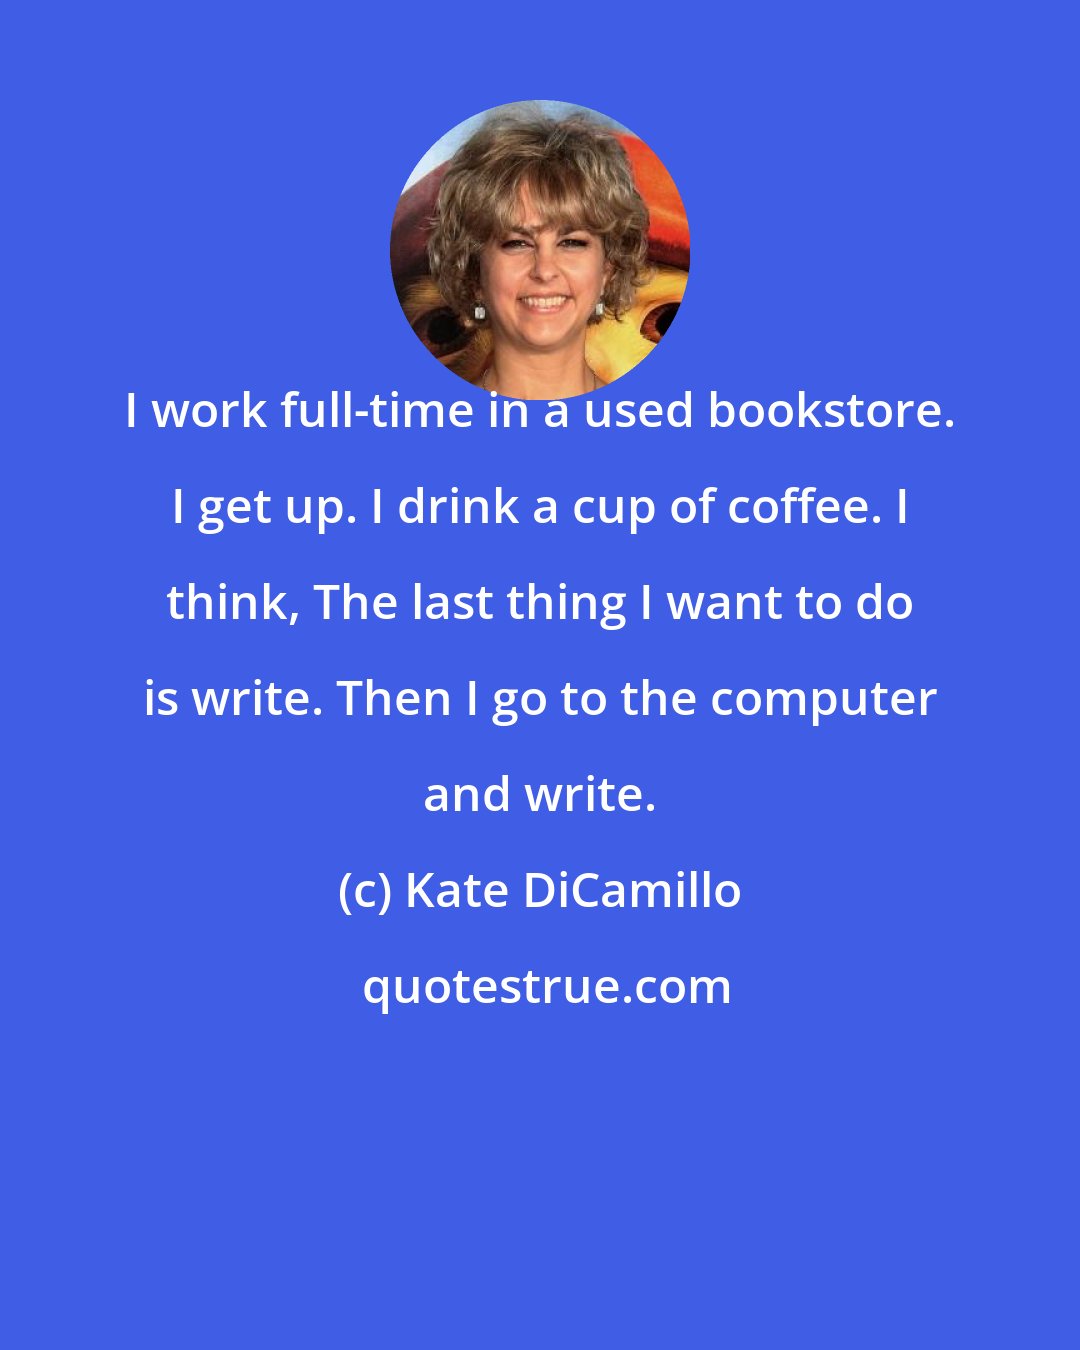 Kate DiCamillo: I work full-time in a used bookstore. I get up. I drink a cup of coffee. I think, The last thing I want to do is write. Then I go to the computer and write.